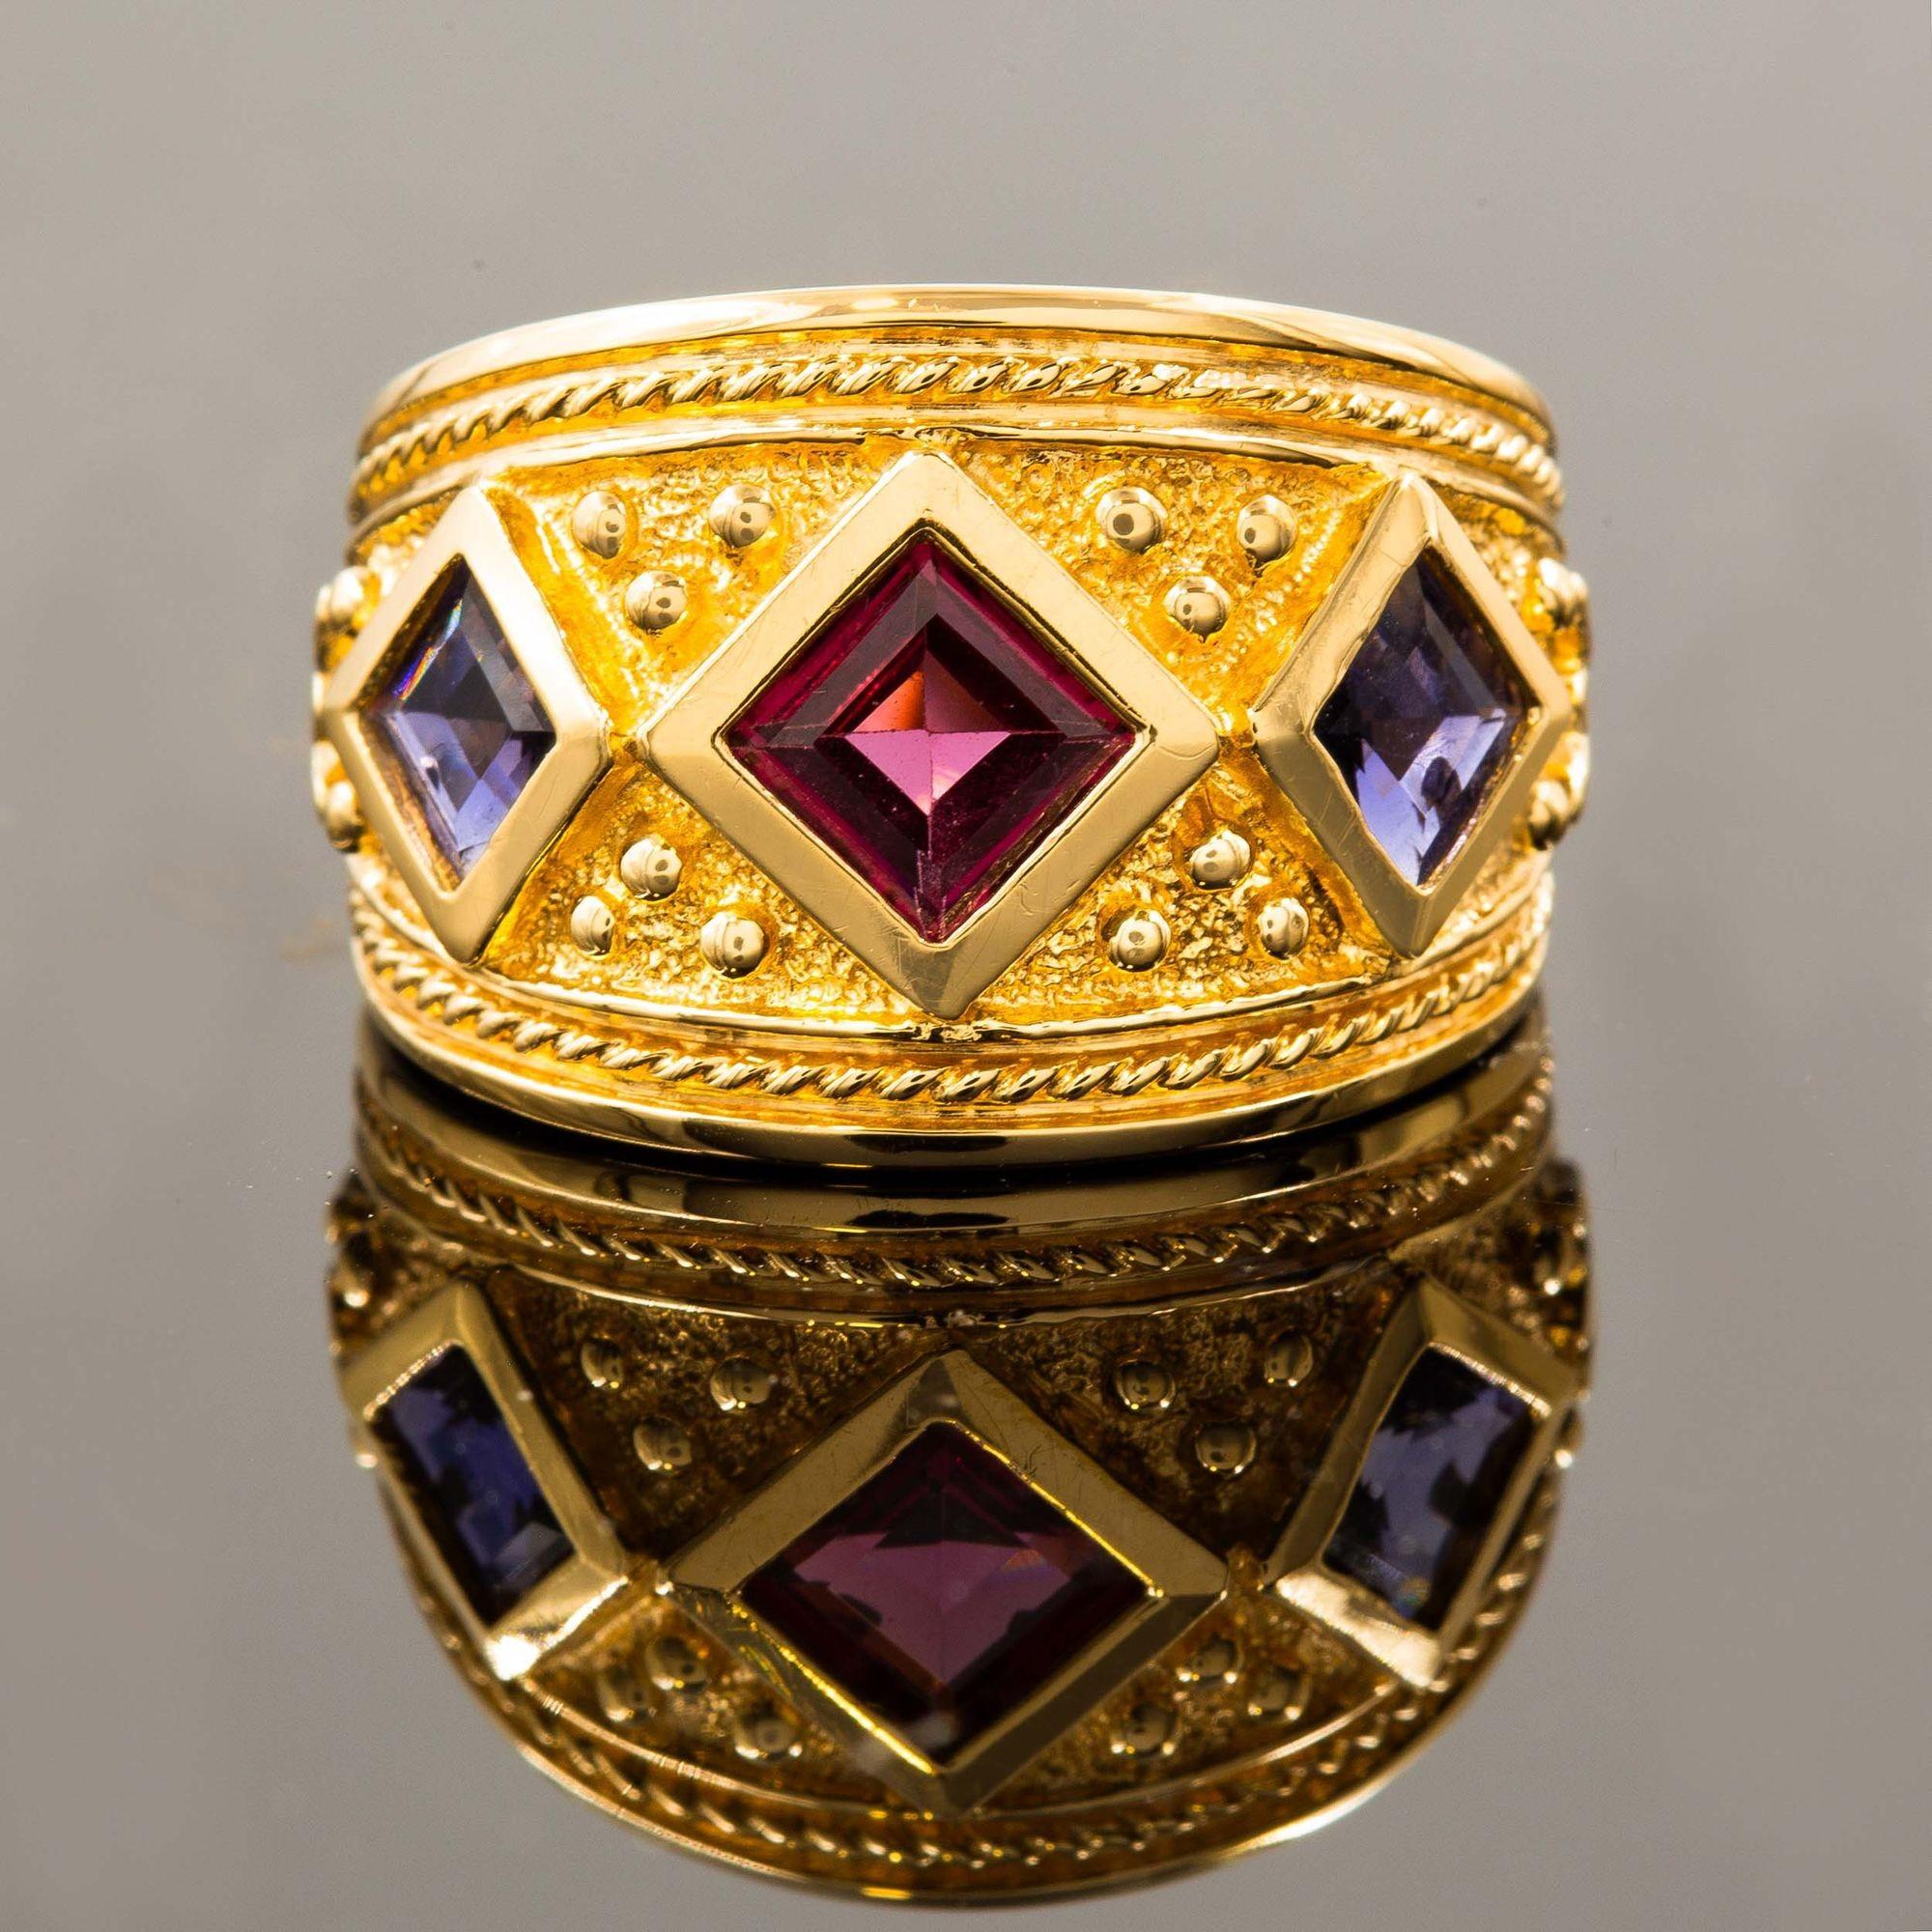 ETRUSCAN REVIVAL STYLE 14K YELLOW GOLD AND GEMSTONE RING  SIZE 8
Item # 308GEX11P 

A positively stunning vintage ring by Art's Elegance, it features a stippled-ground with raised high-polish square bezel-set gemstones set within a twisted-rope